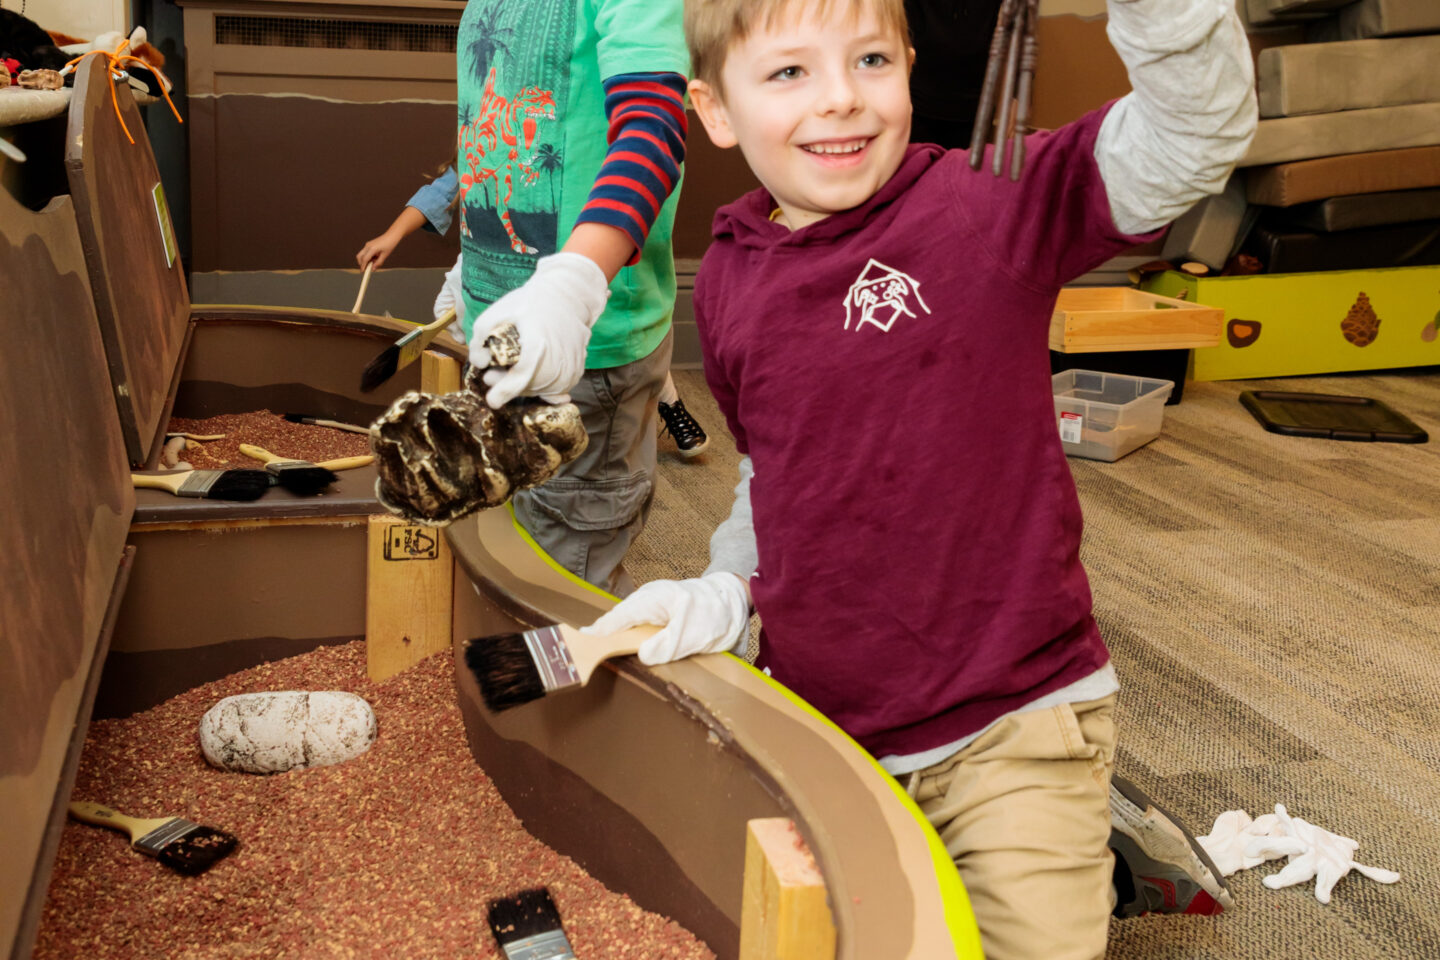 Winter Break Drop-In Activity Centre: Dig It! Archaeology 101 with the Hamilton Children’s Museum